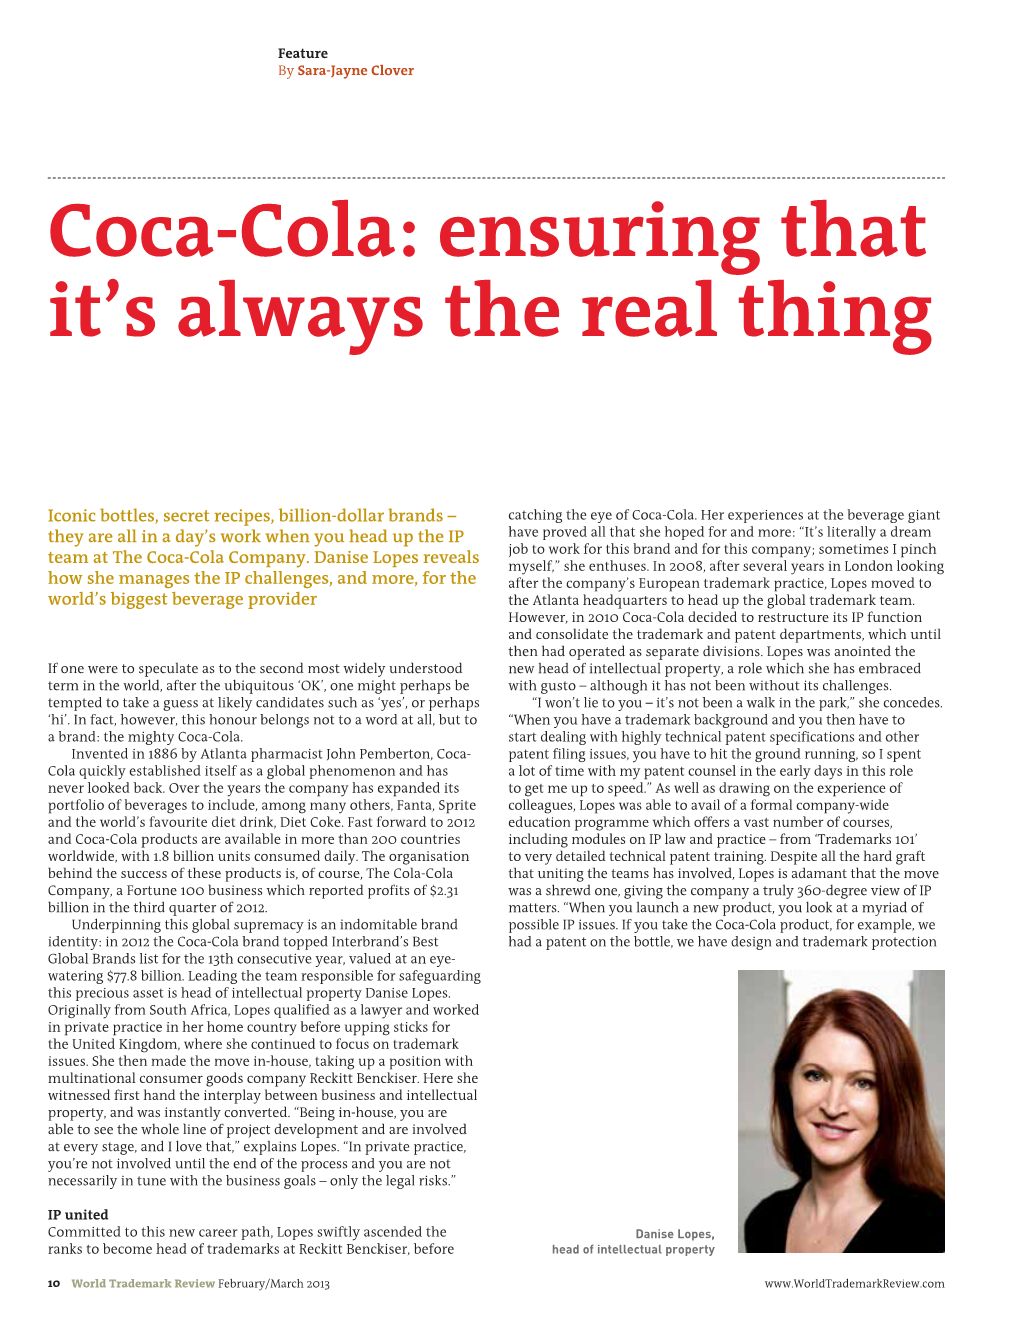 Coca-Cola: Ensuring That It’S Always the Real Thing